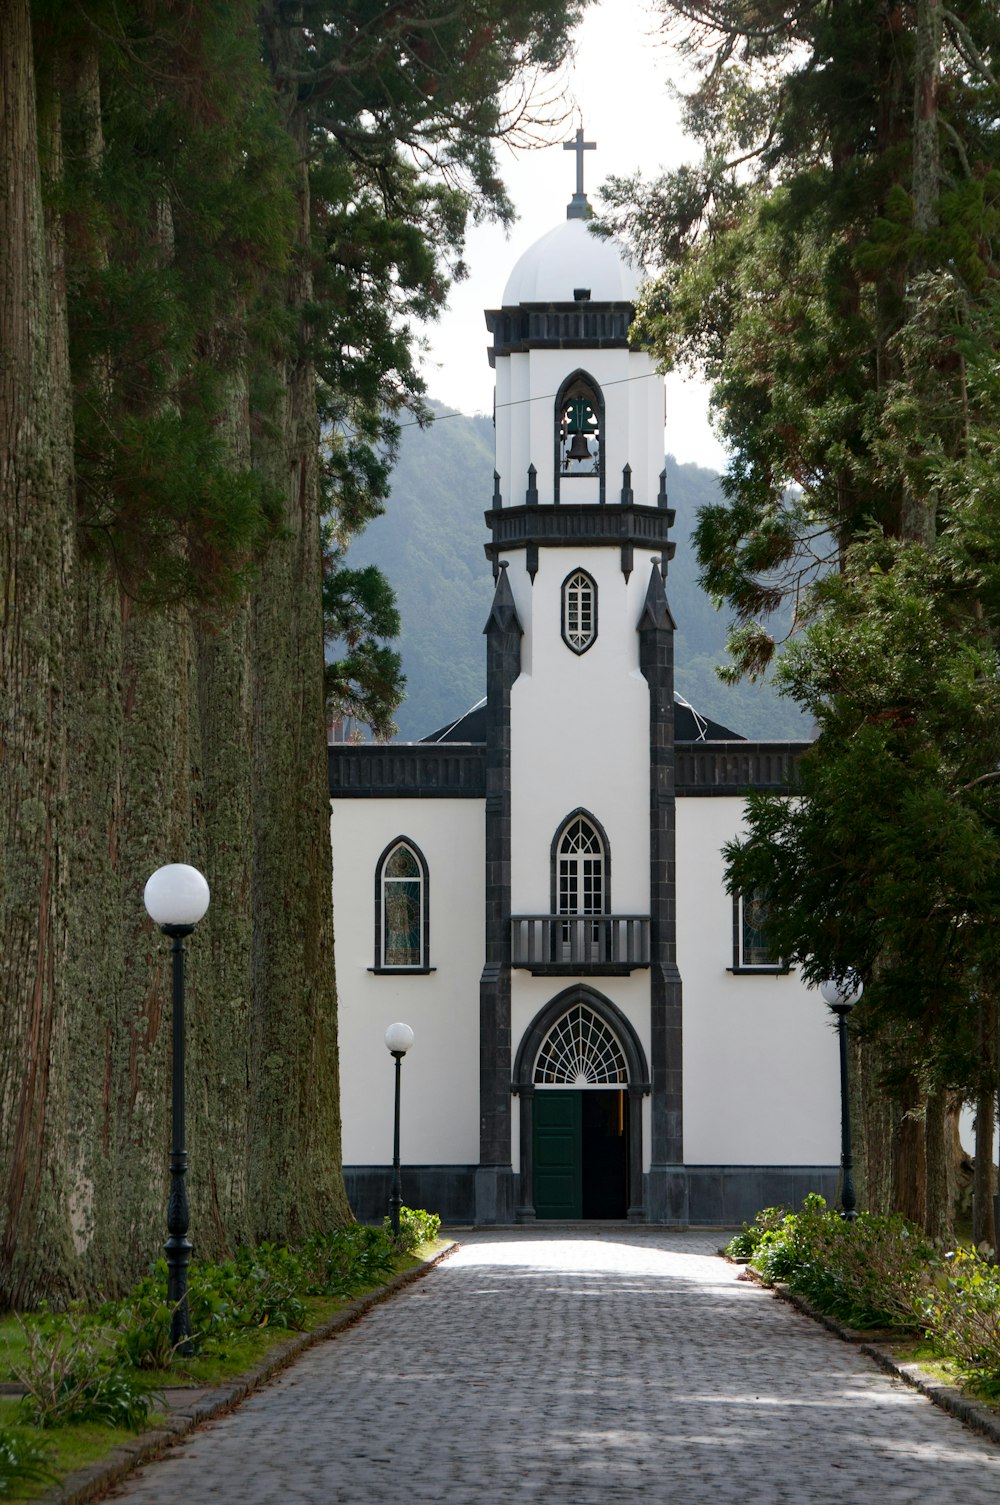 a white and black church with a clock tower